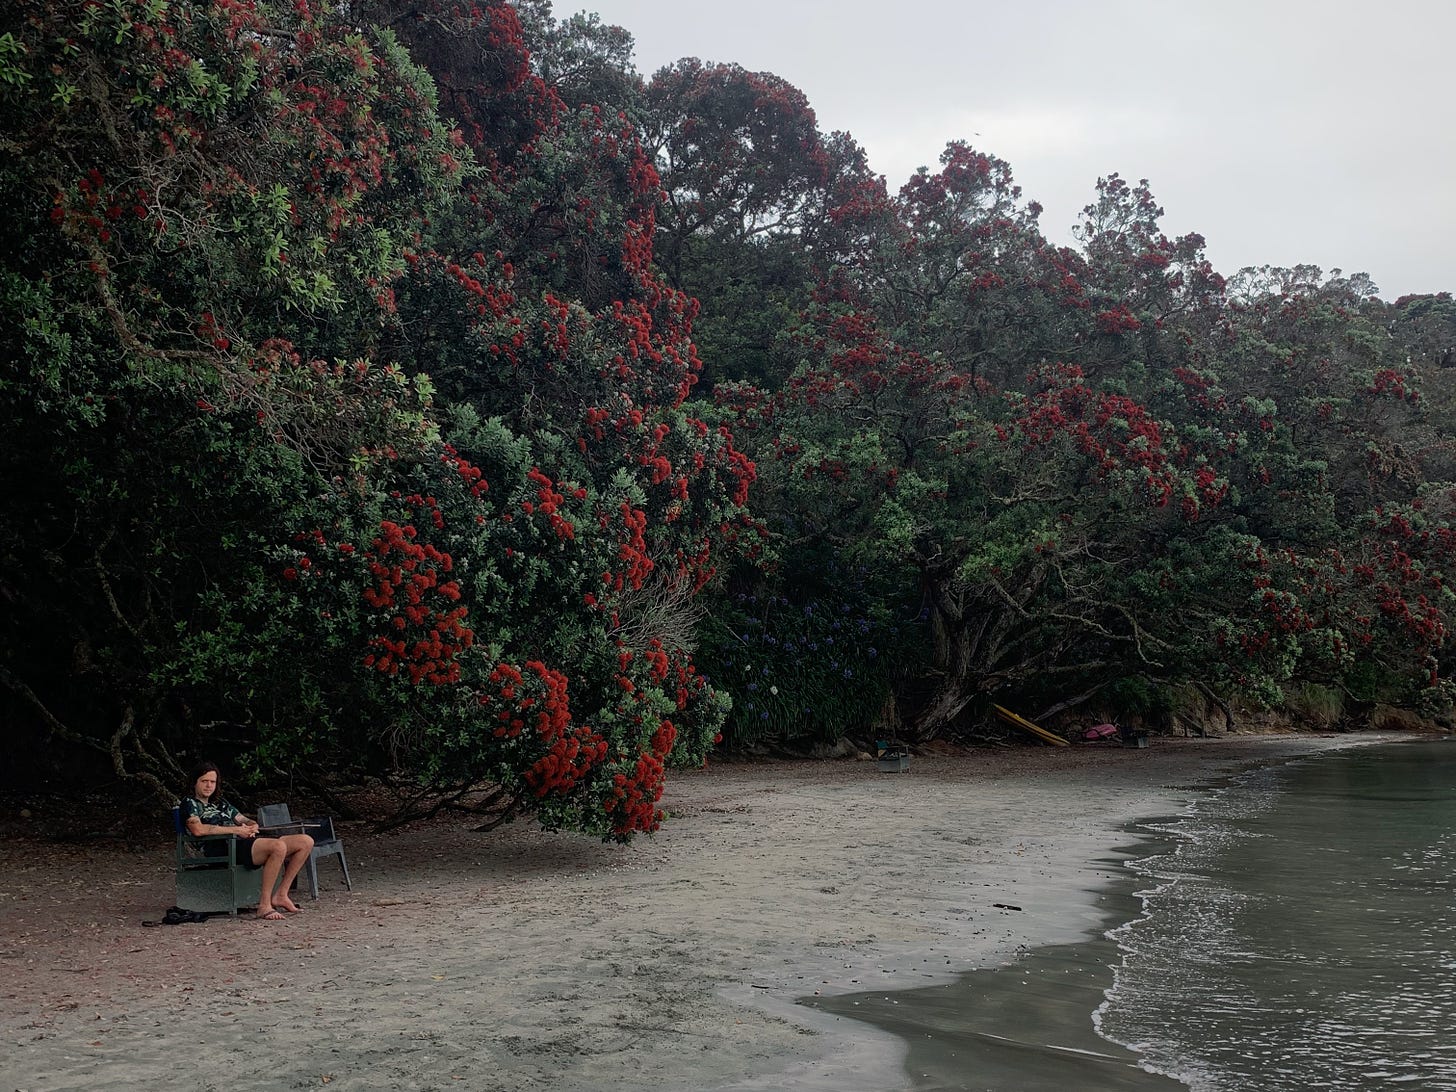 Hannah's partner Ryan sits beneath a large Pohutukawa tree on the beach. The sea is just in frame and is a murky green colour. The pohutukawa flowers are deep red, at the end of their season